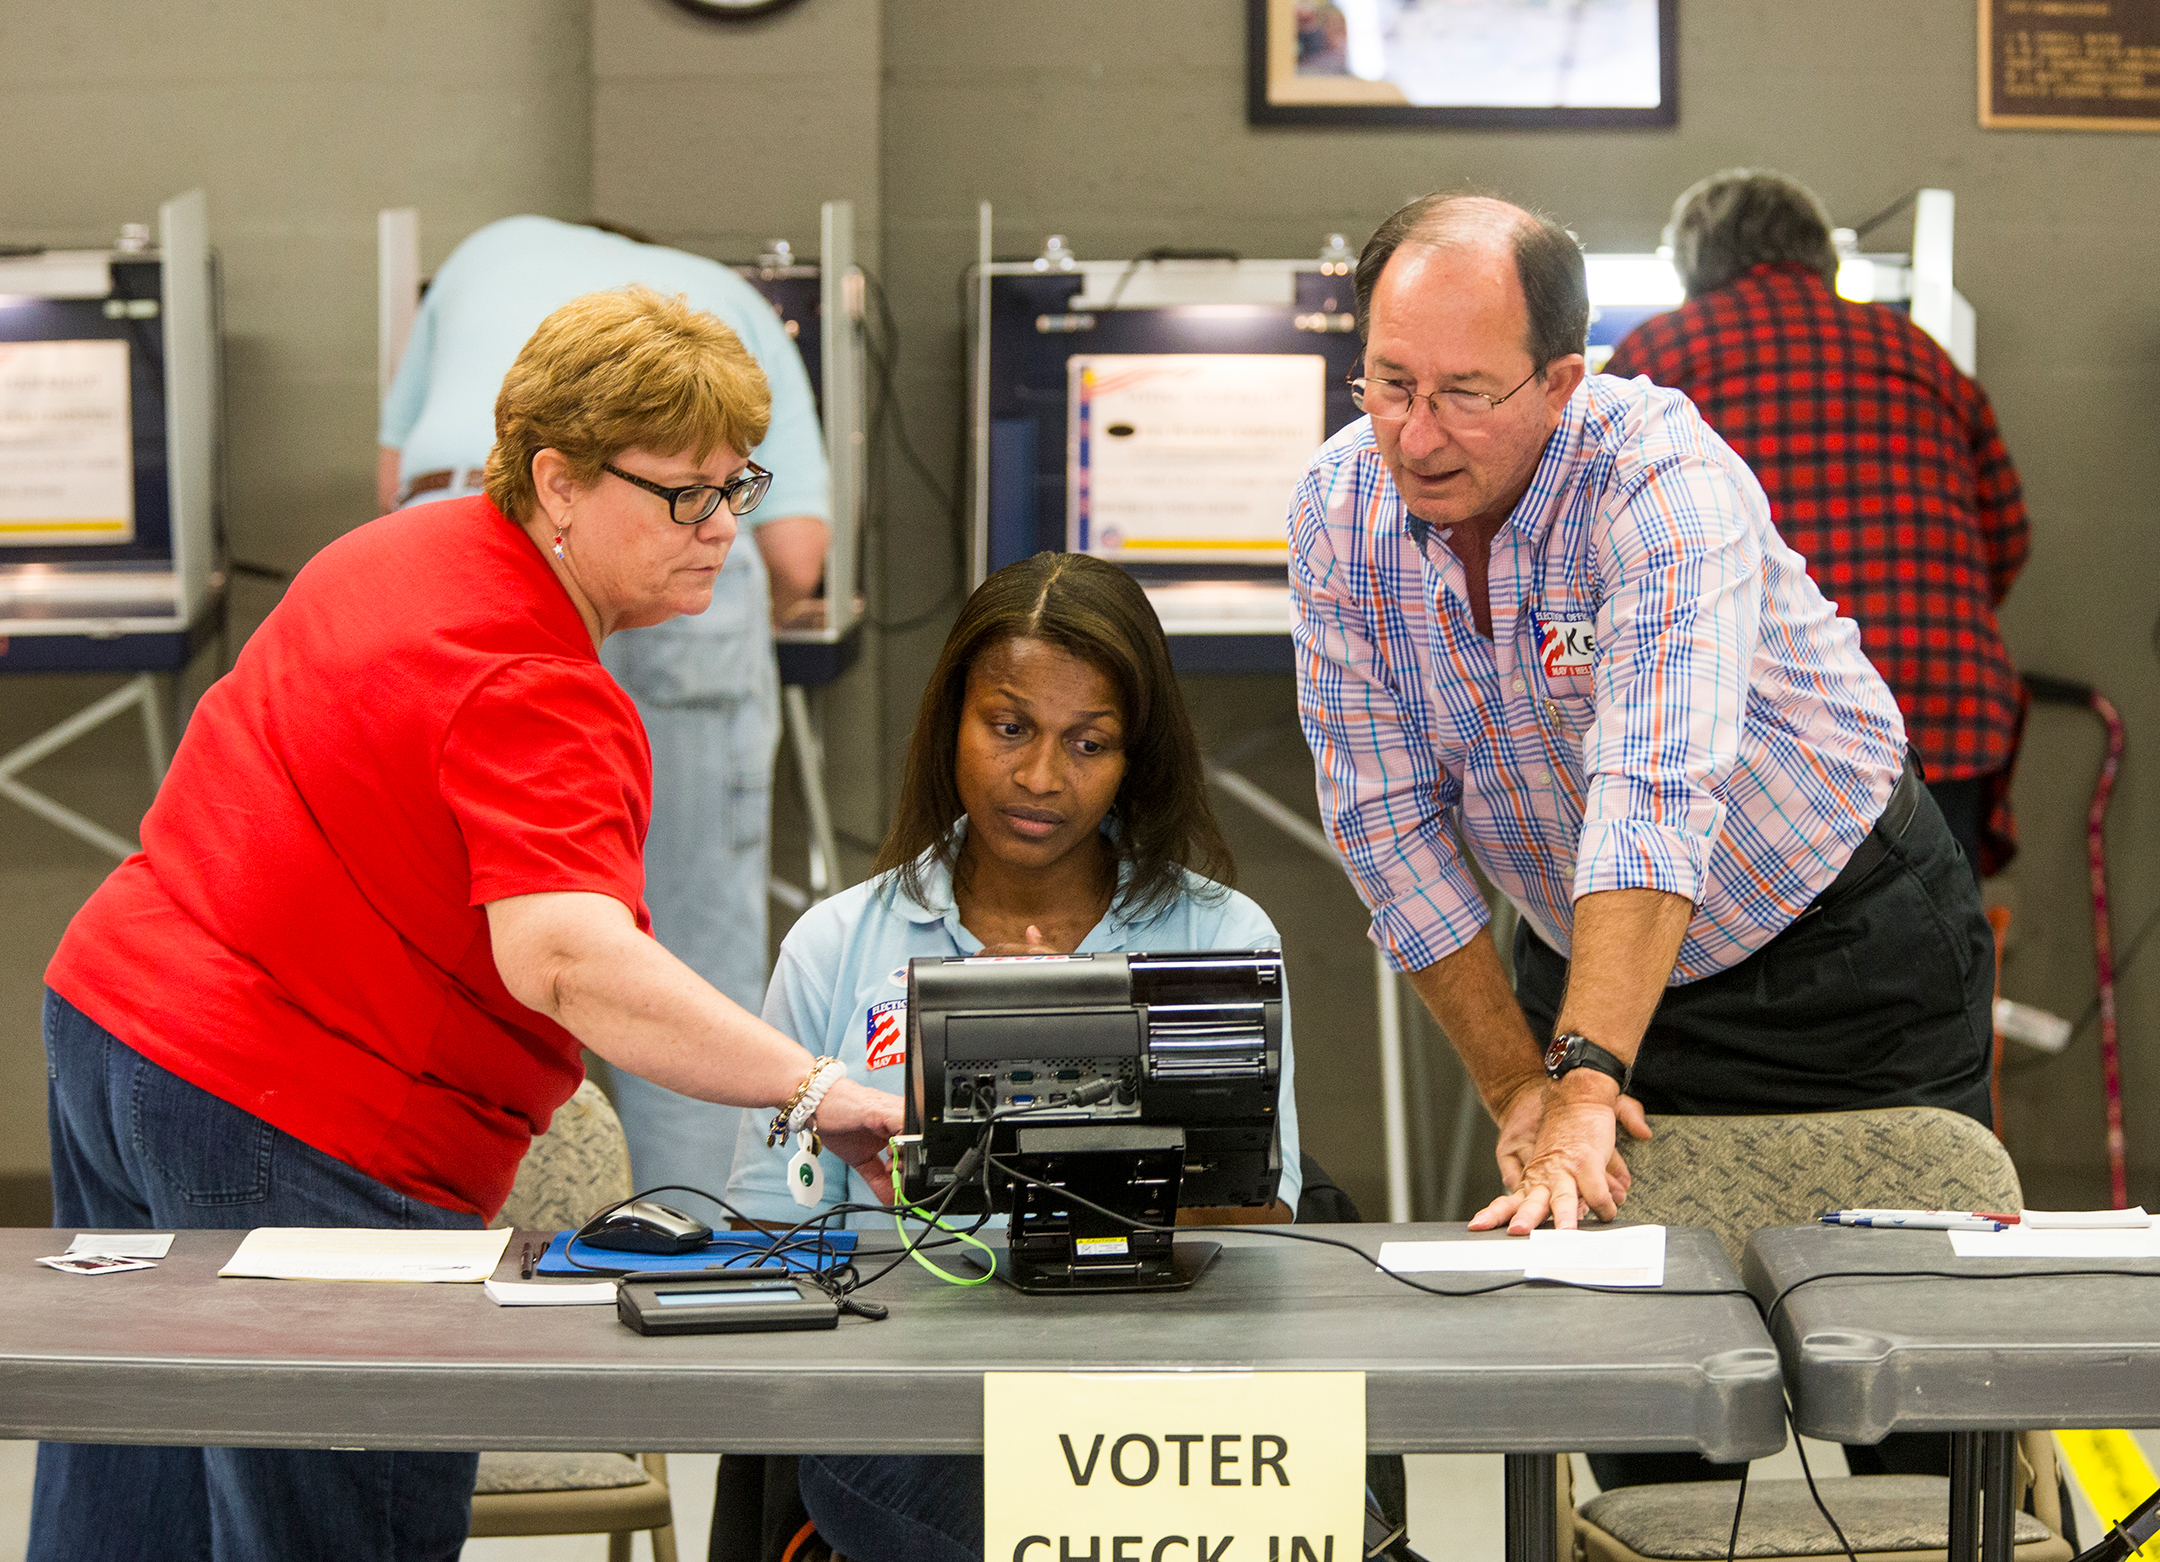 Three people, two women and a man, look at and point at a screen in an election polling place